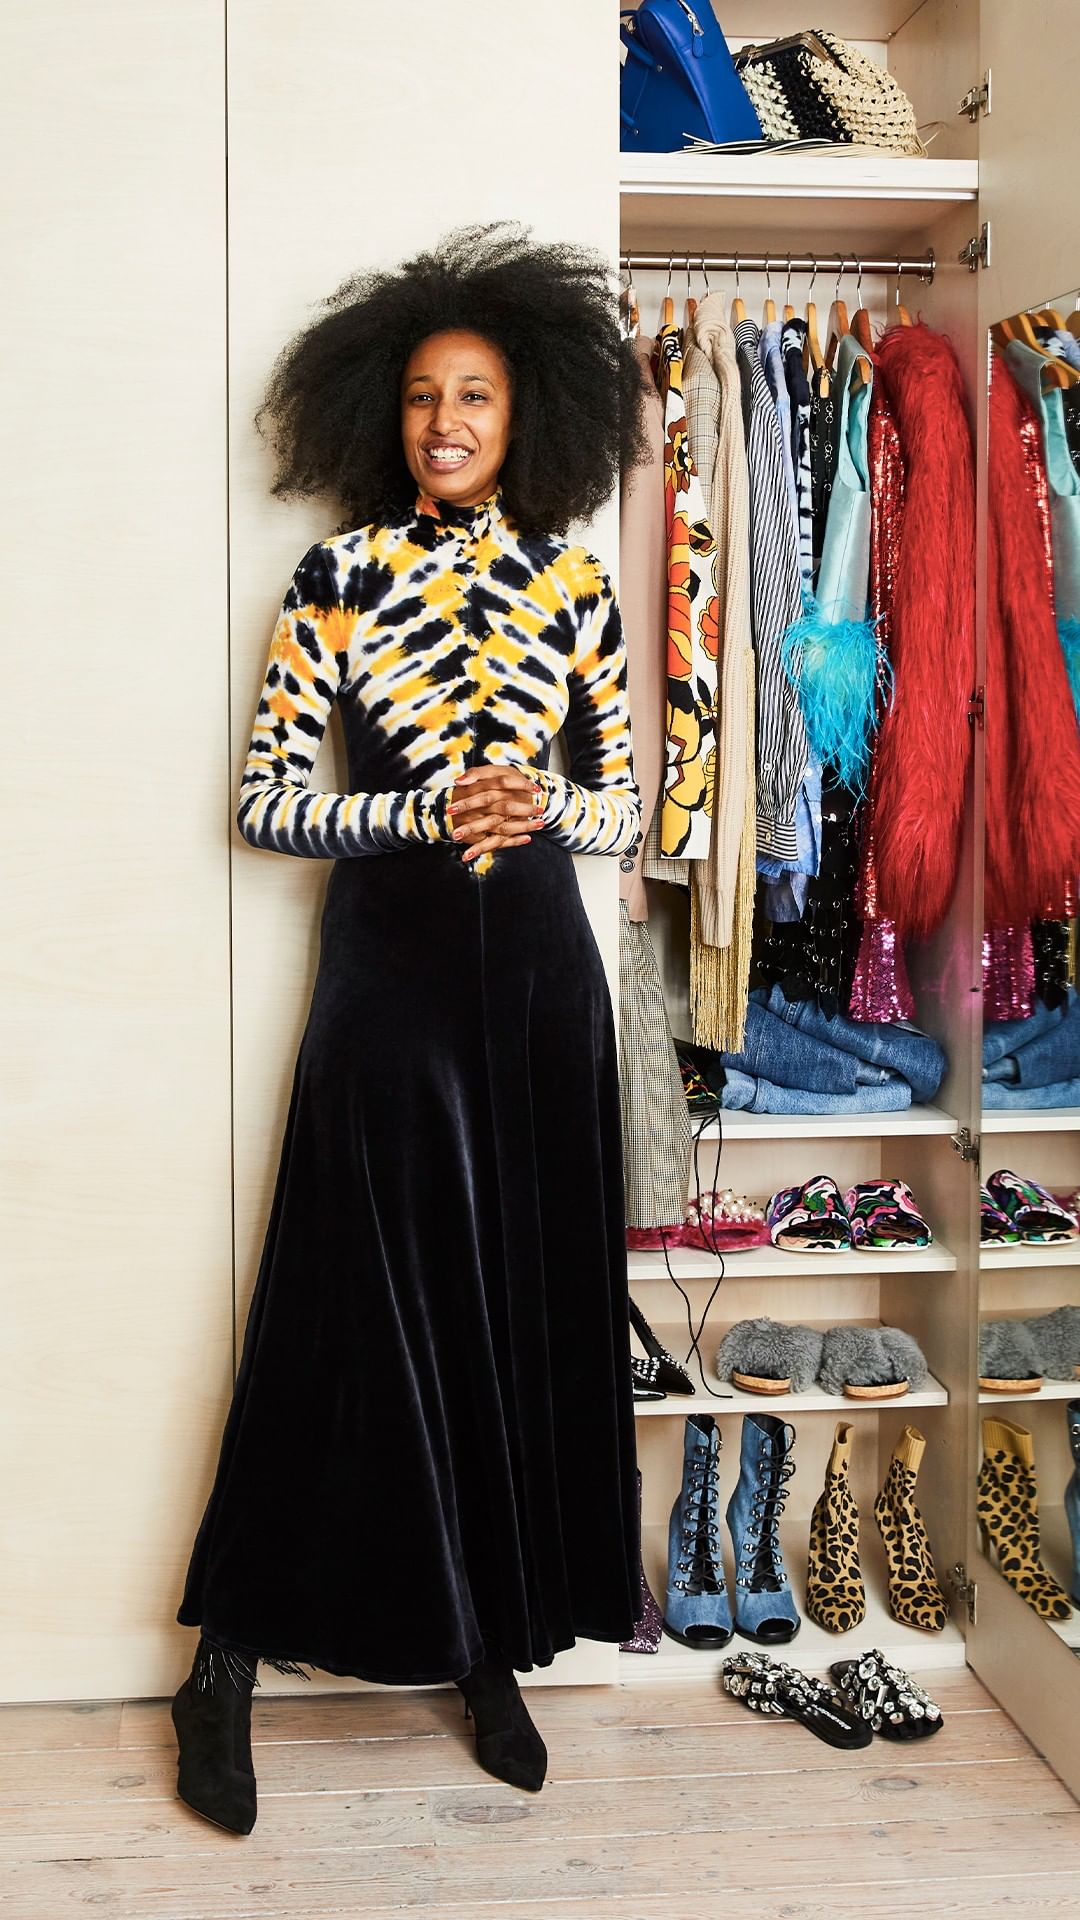 THE OUTNET - Fashion Editor Julia Sarr Jamois knows better than anyone that midi dresses make the outfit, and the closet really. What's your wardrobe story? #mysecretsoutnet